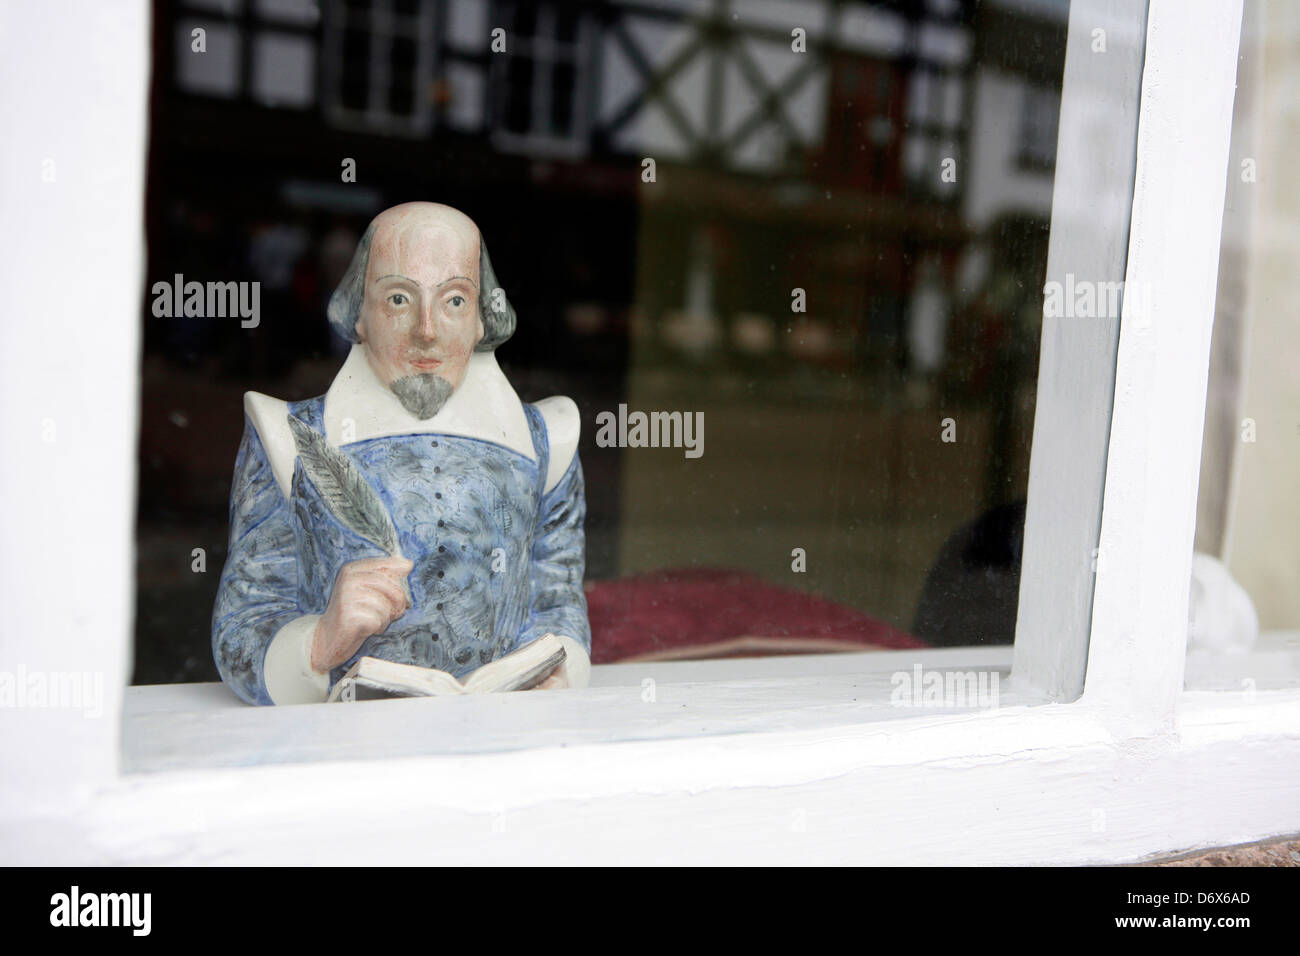 Porcelain bust of William Shakespear in a house window, Stratford upon Avon. Stock Photo